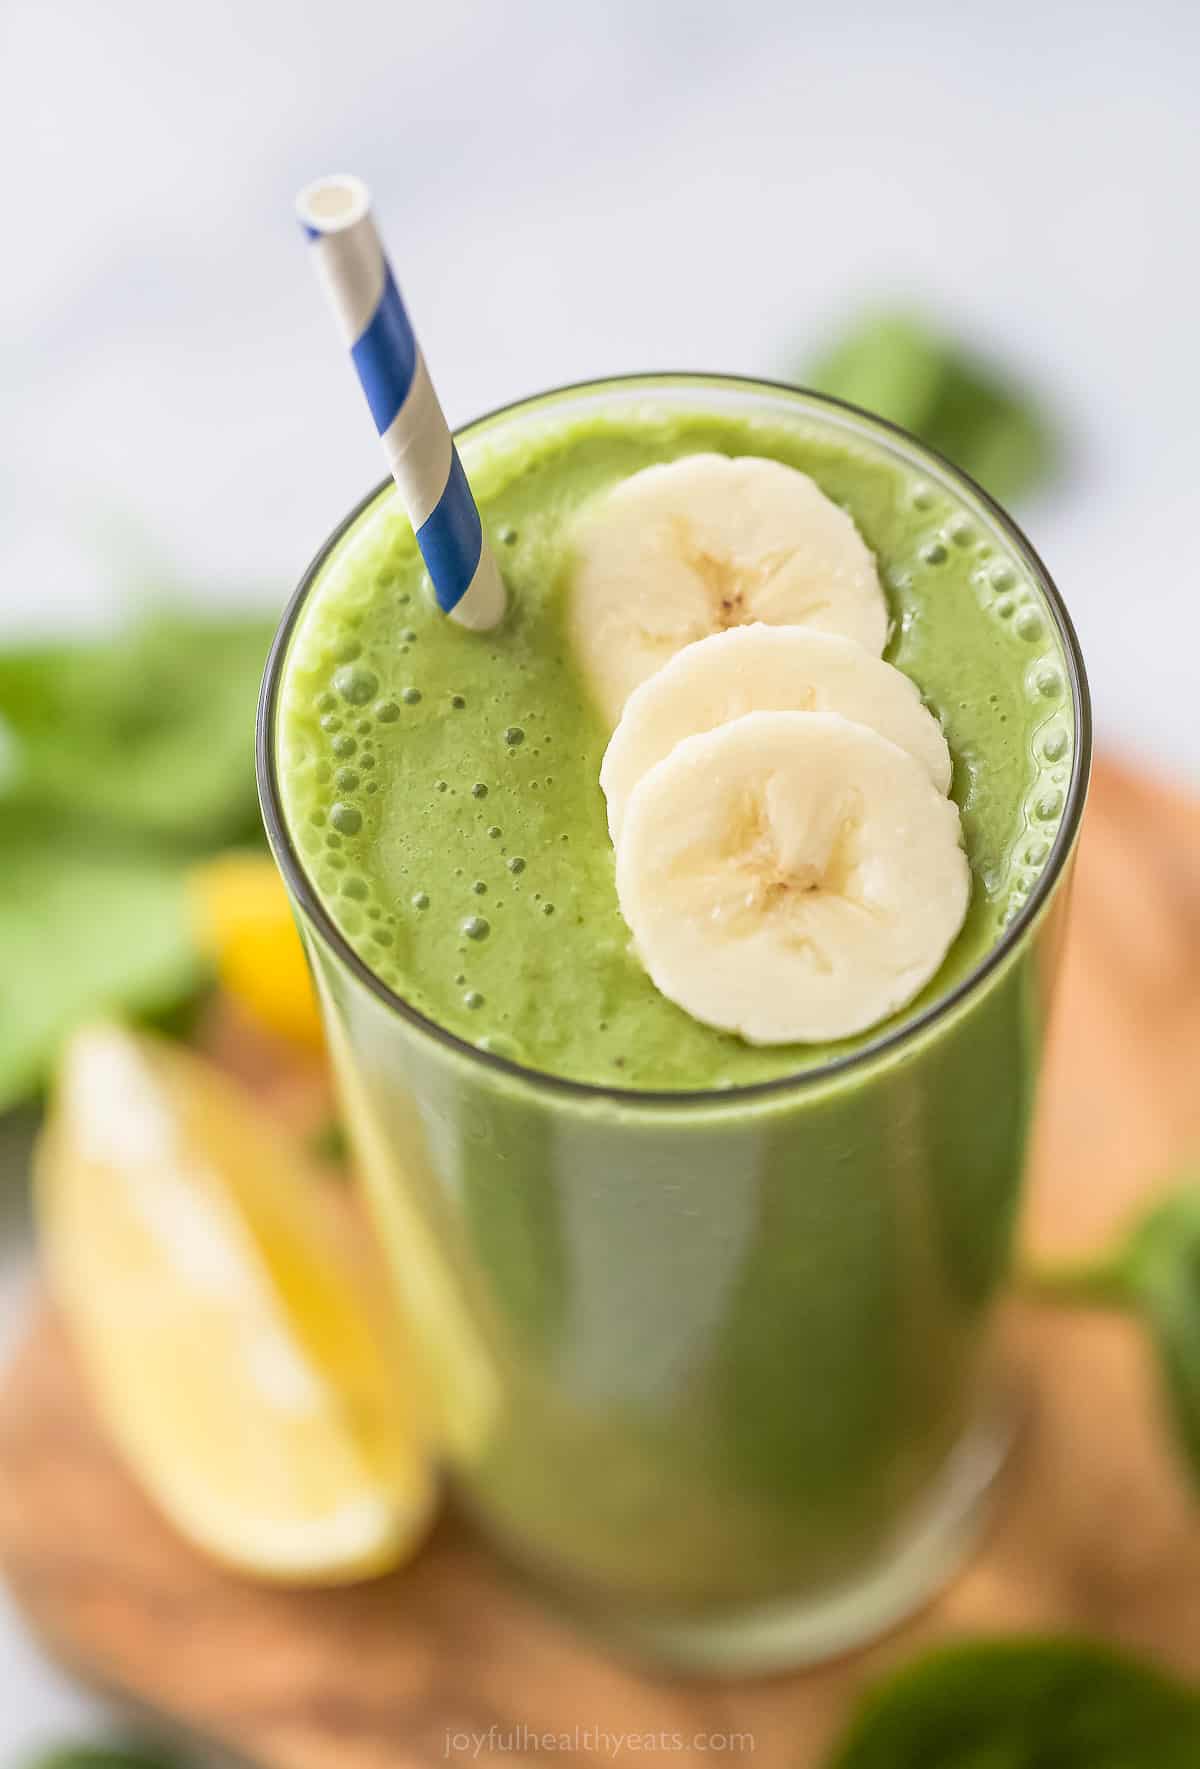 top view of a green smoothie with banana slices as garnish